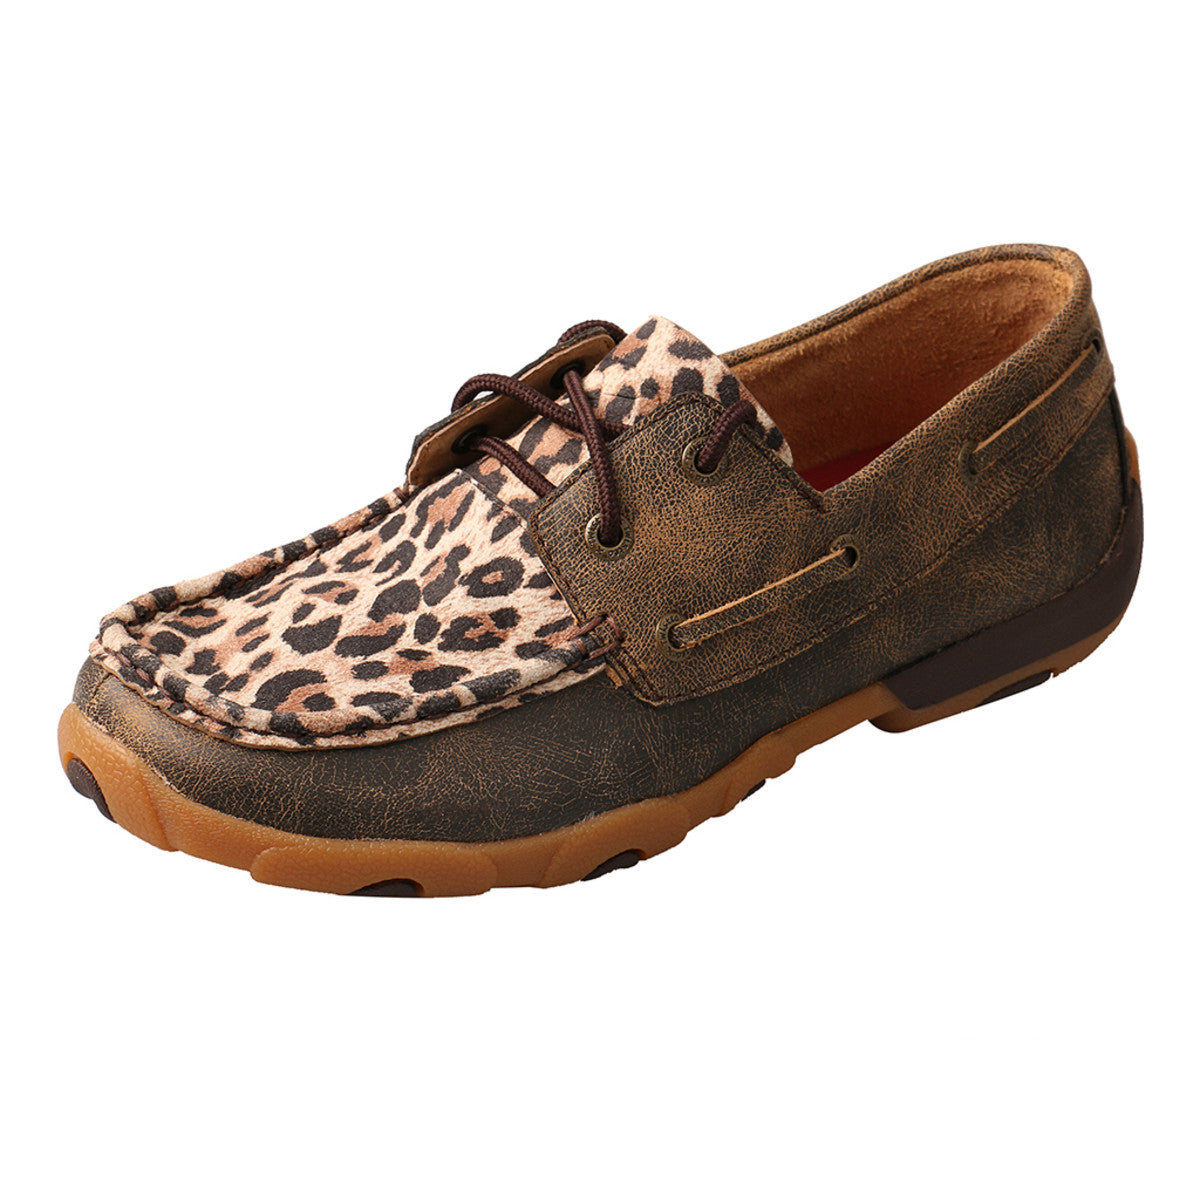 Women's Twisted X Boat Shoe Driving Moccasins in Distressed & Leopard from the side view